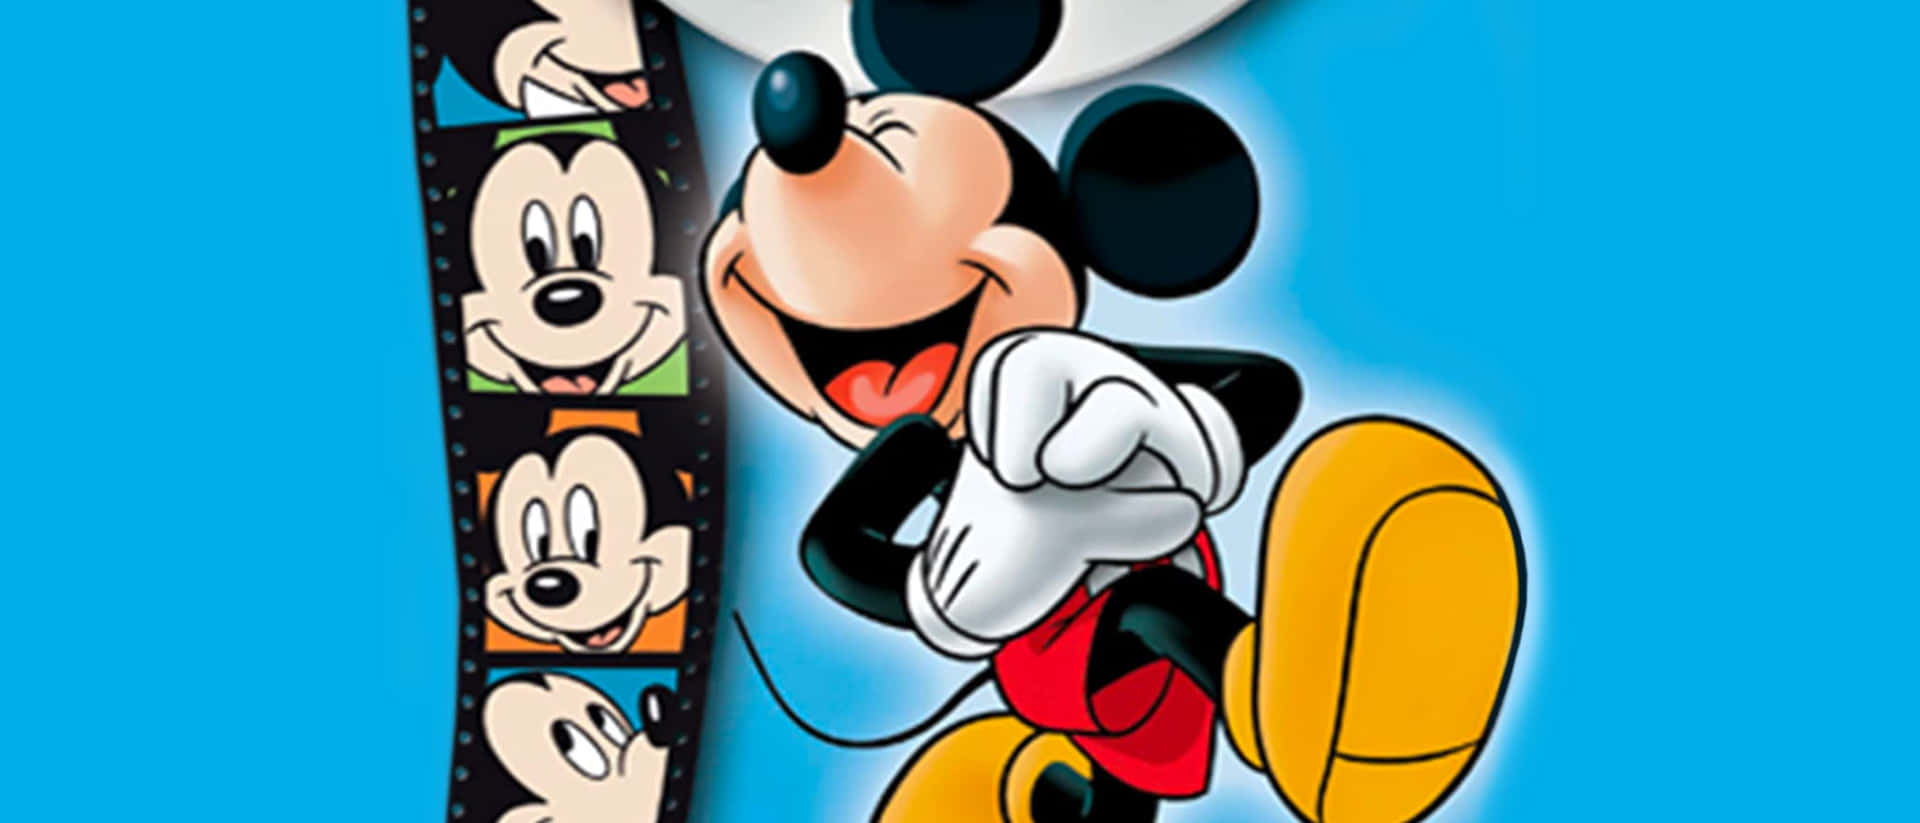 Mickey Mouse is ready to rock the party Wallpaper